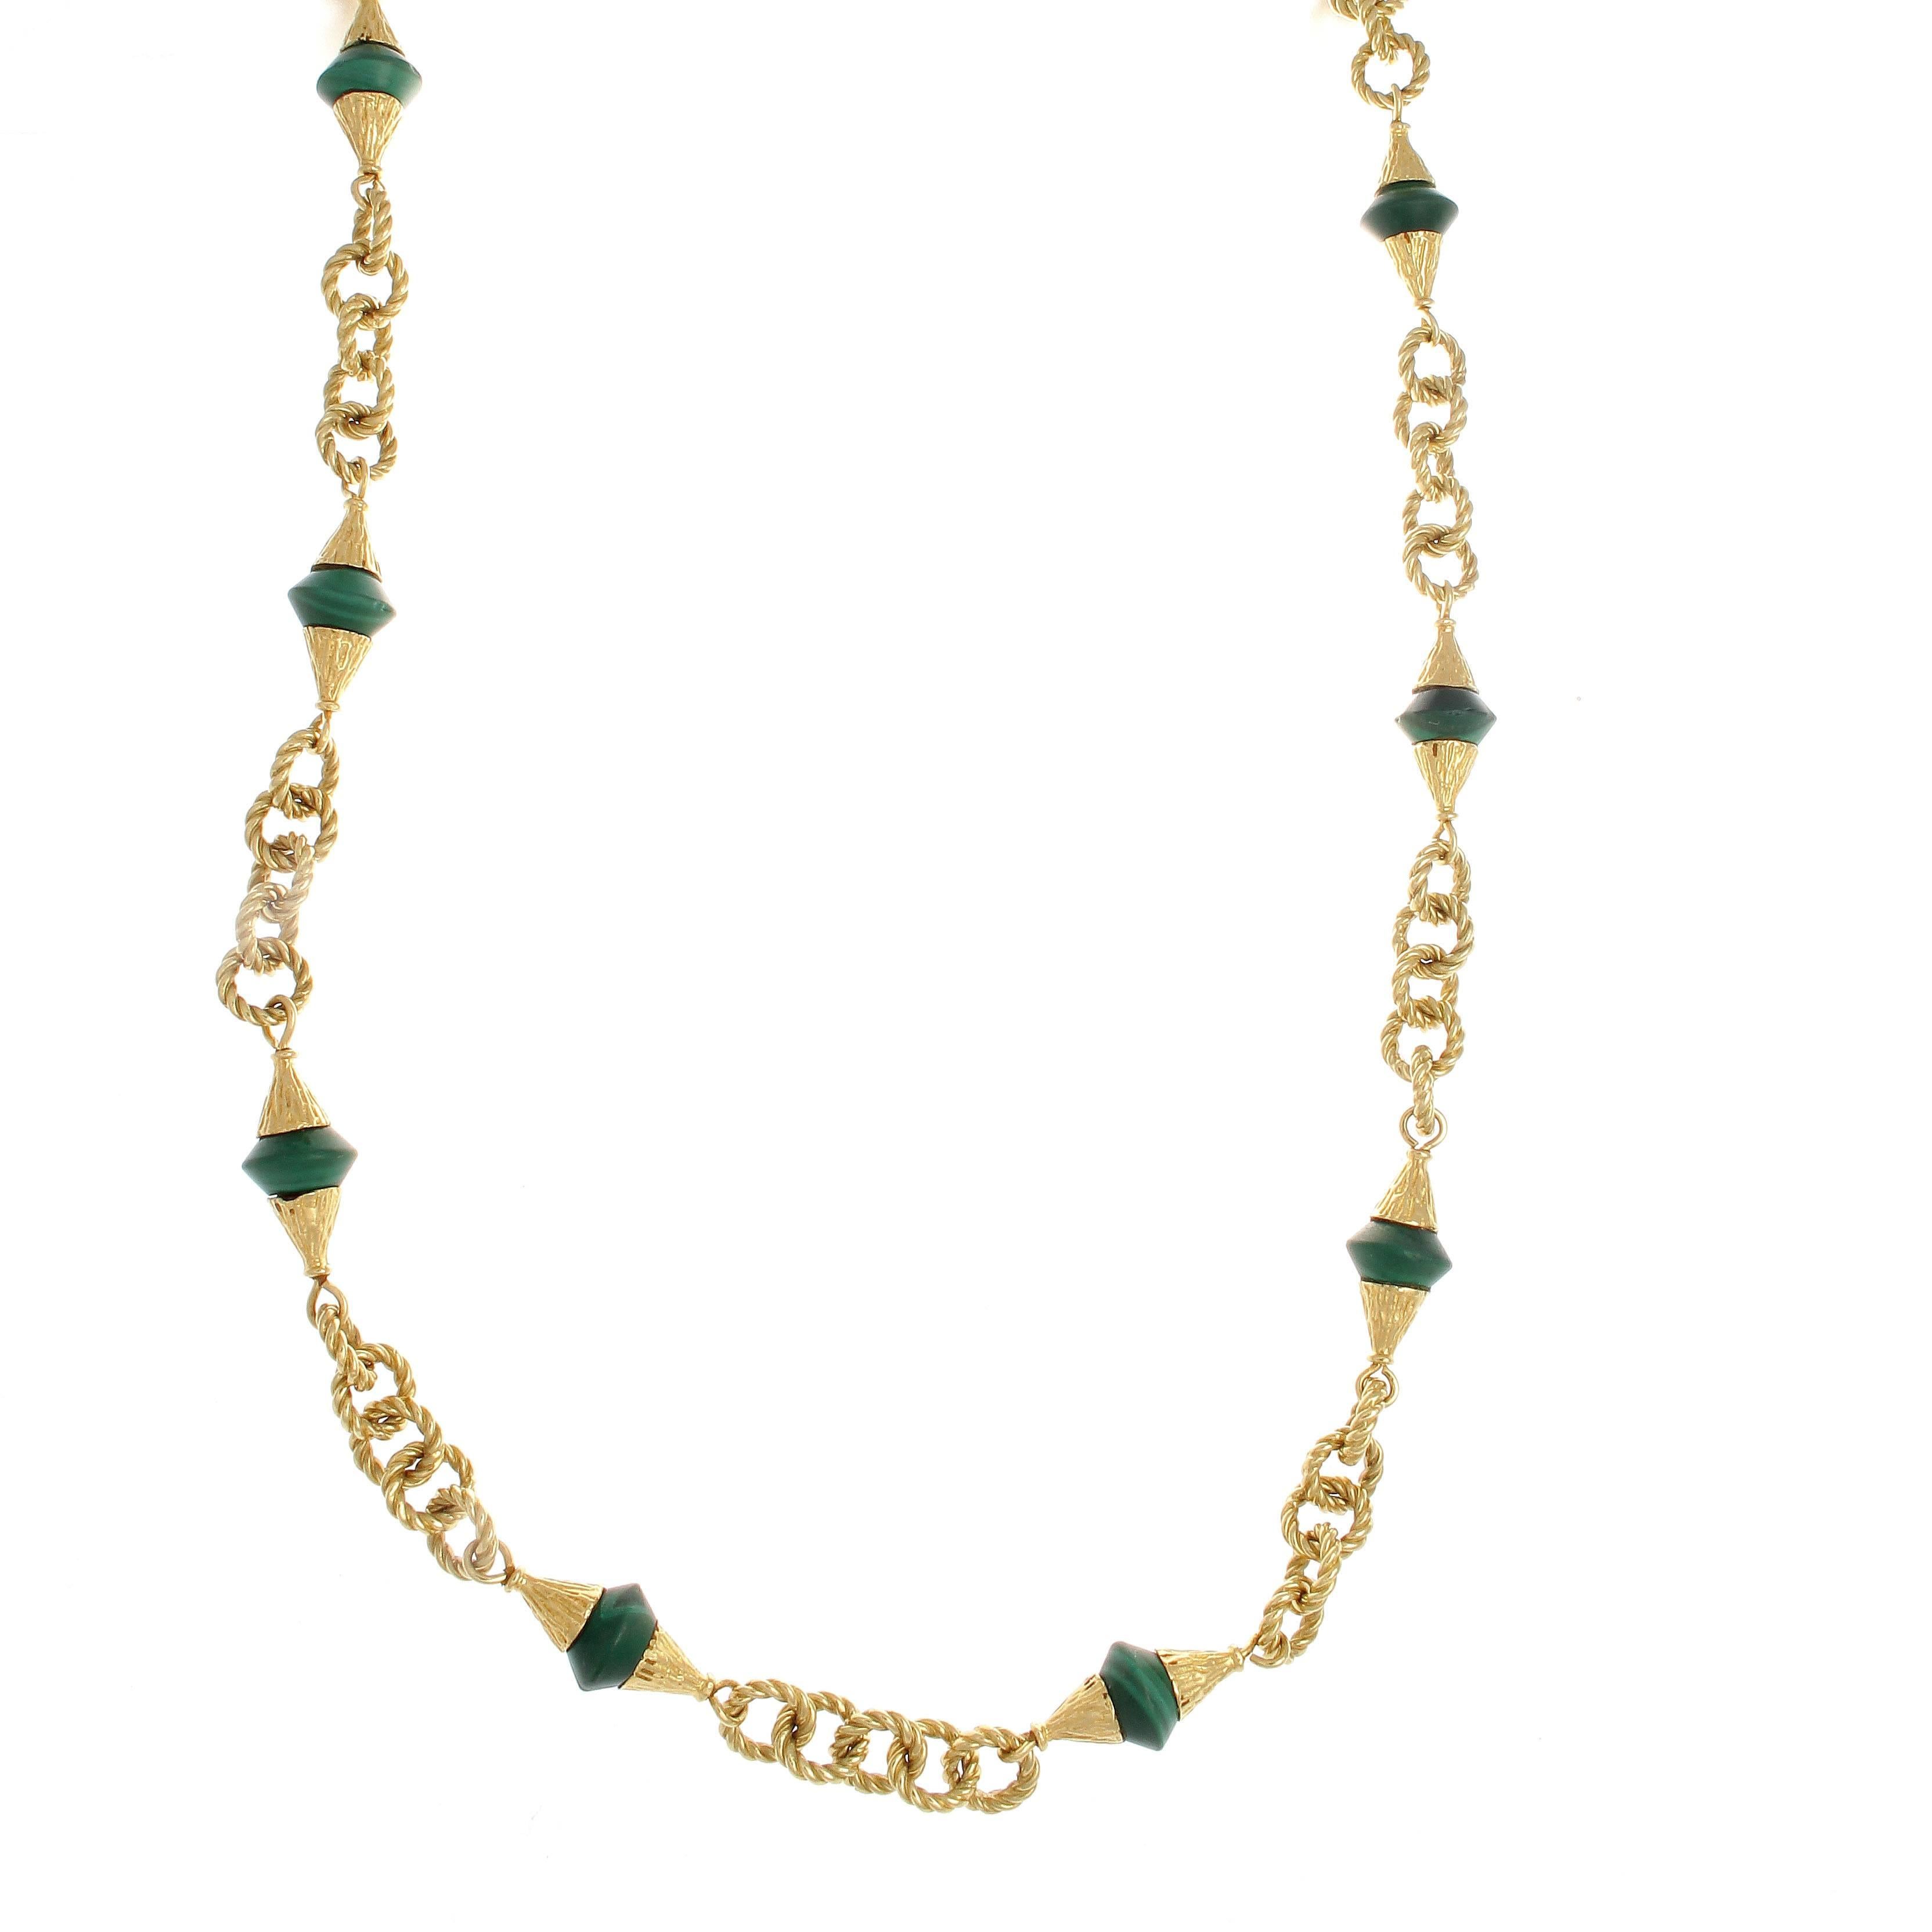 Tiffany prides itself on its creative elegance that has engineered timeless creations. During the 1960's, when this necklace was created, Audrey Hepburn was indulging in Tiffany's provenance in "Breakfast at Tiffany's" and Andy Warhol's